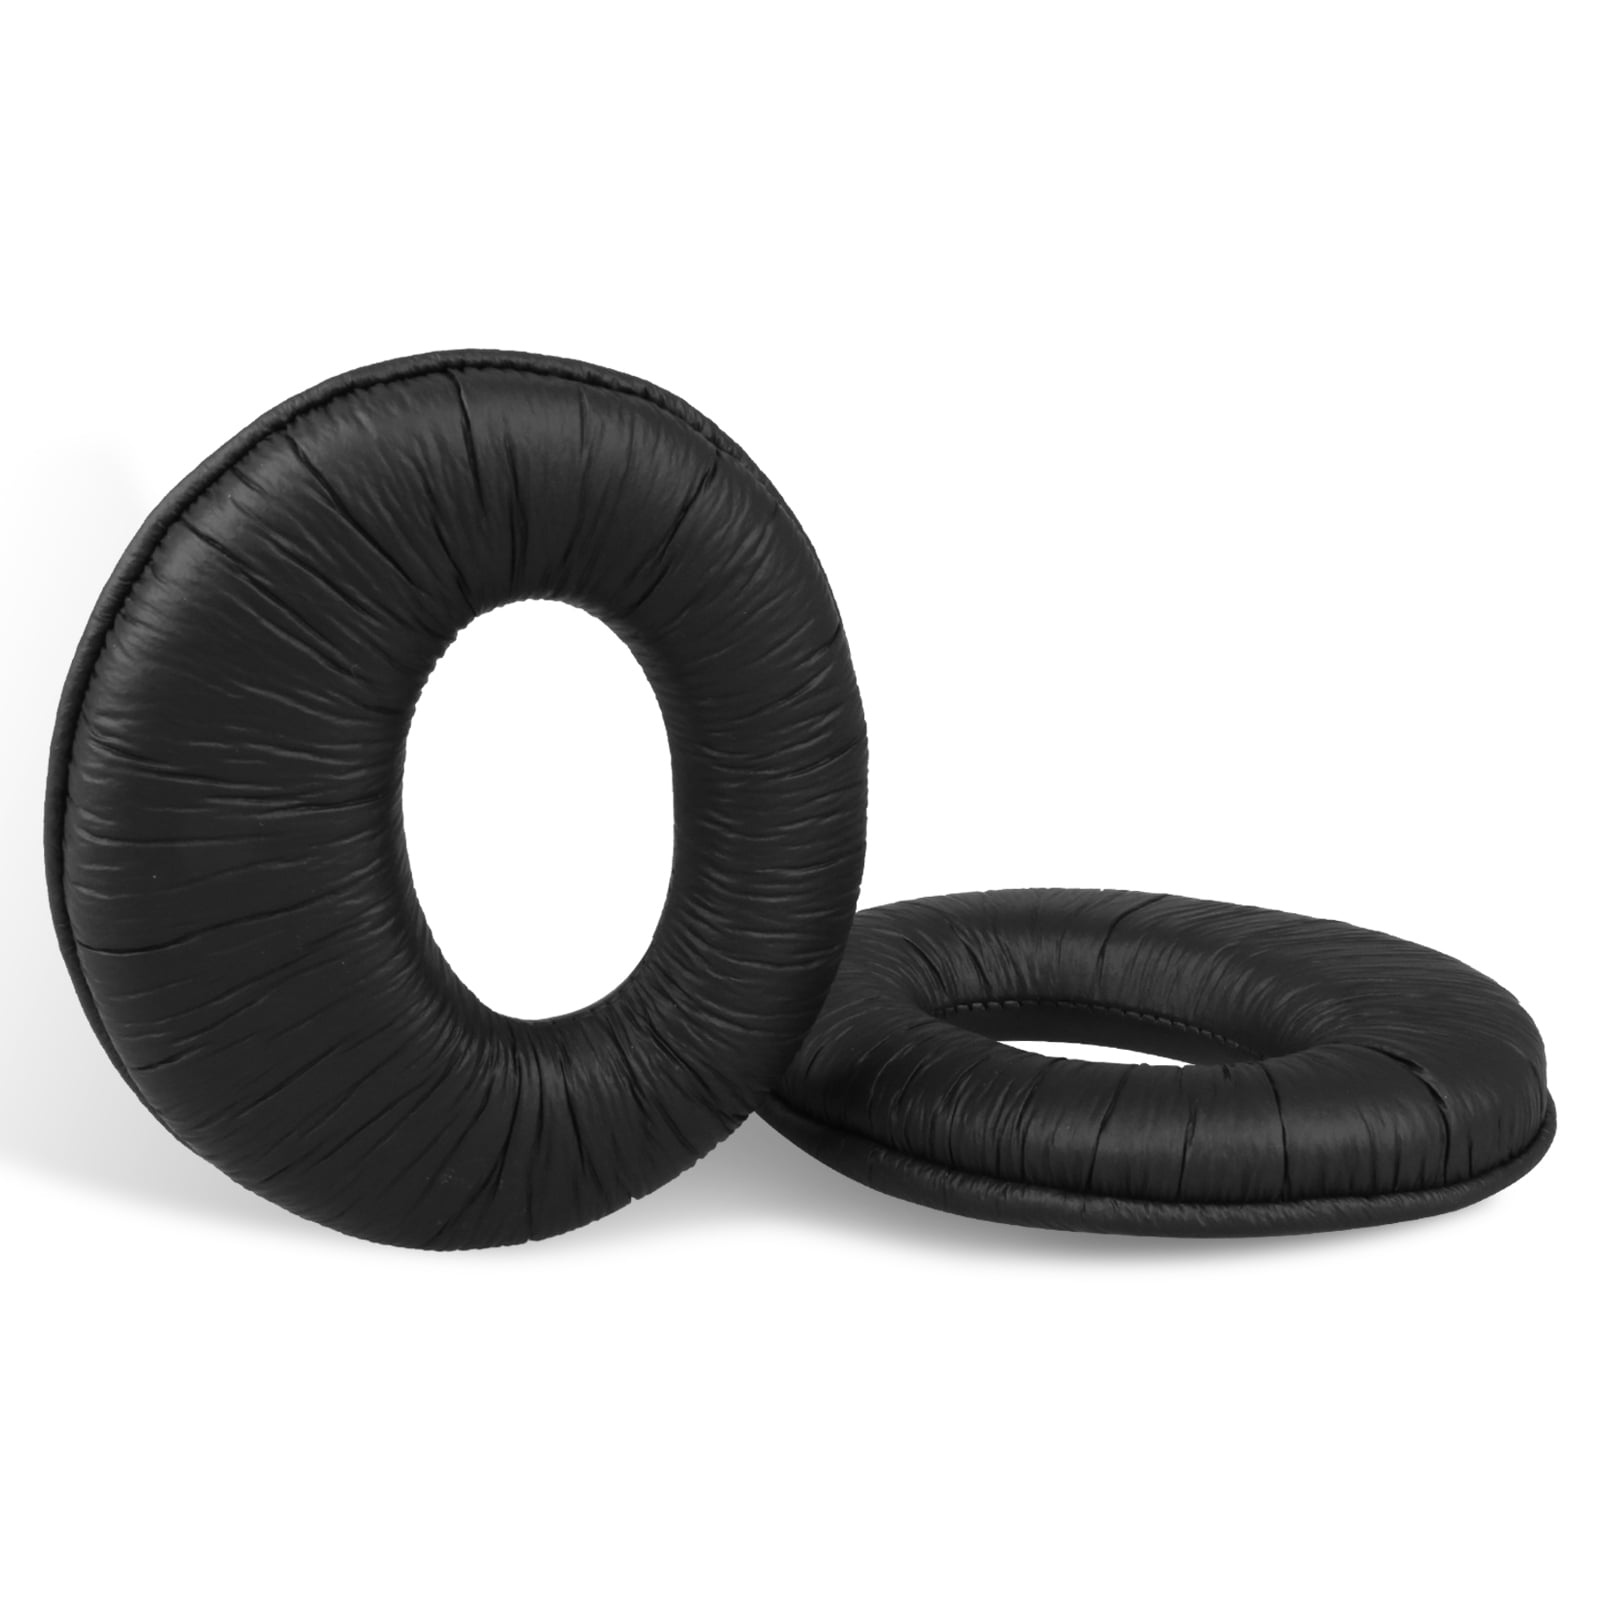 lehaha 1Pair Leather Ear Pads Ear Cushion Cover Earpads Compatible with So-ny MDR-NC7 Headphones